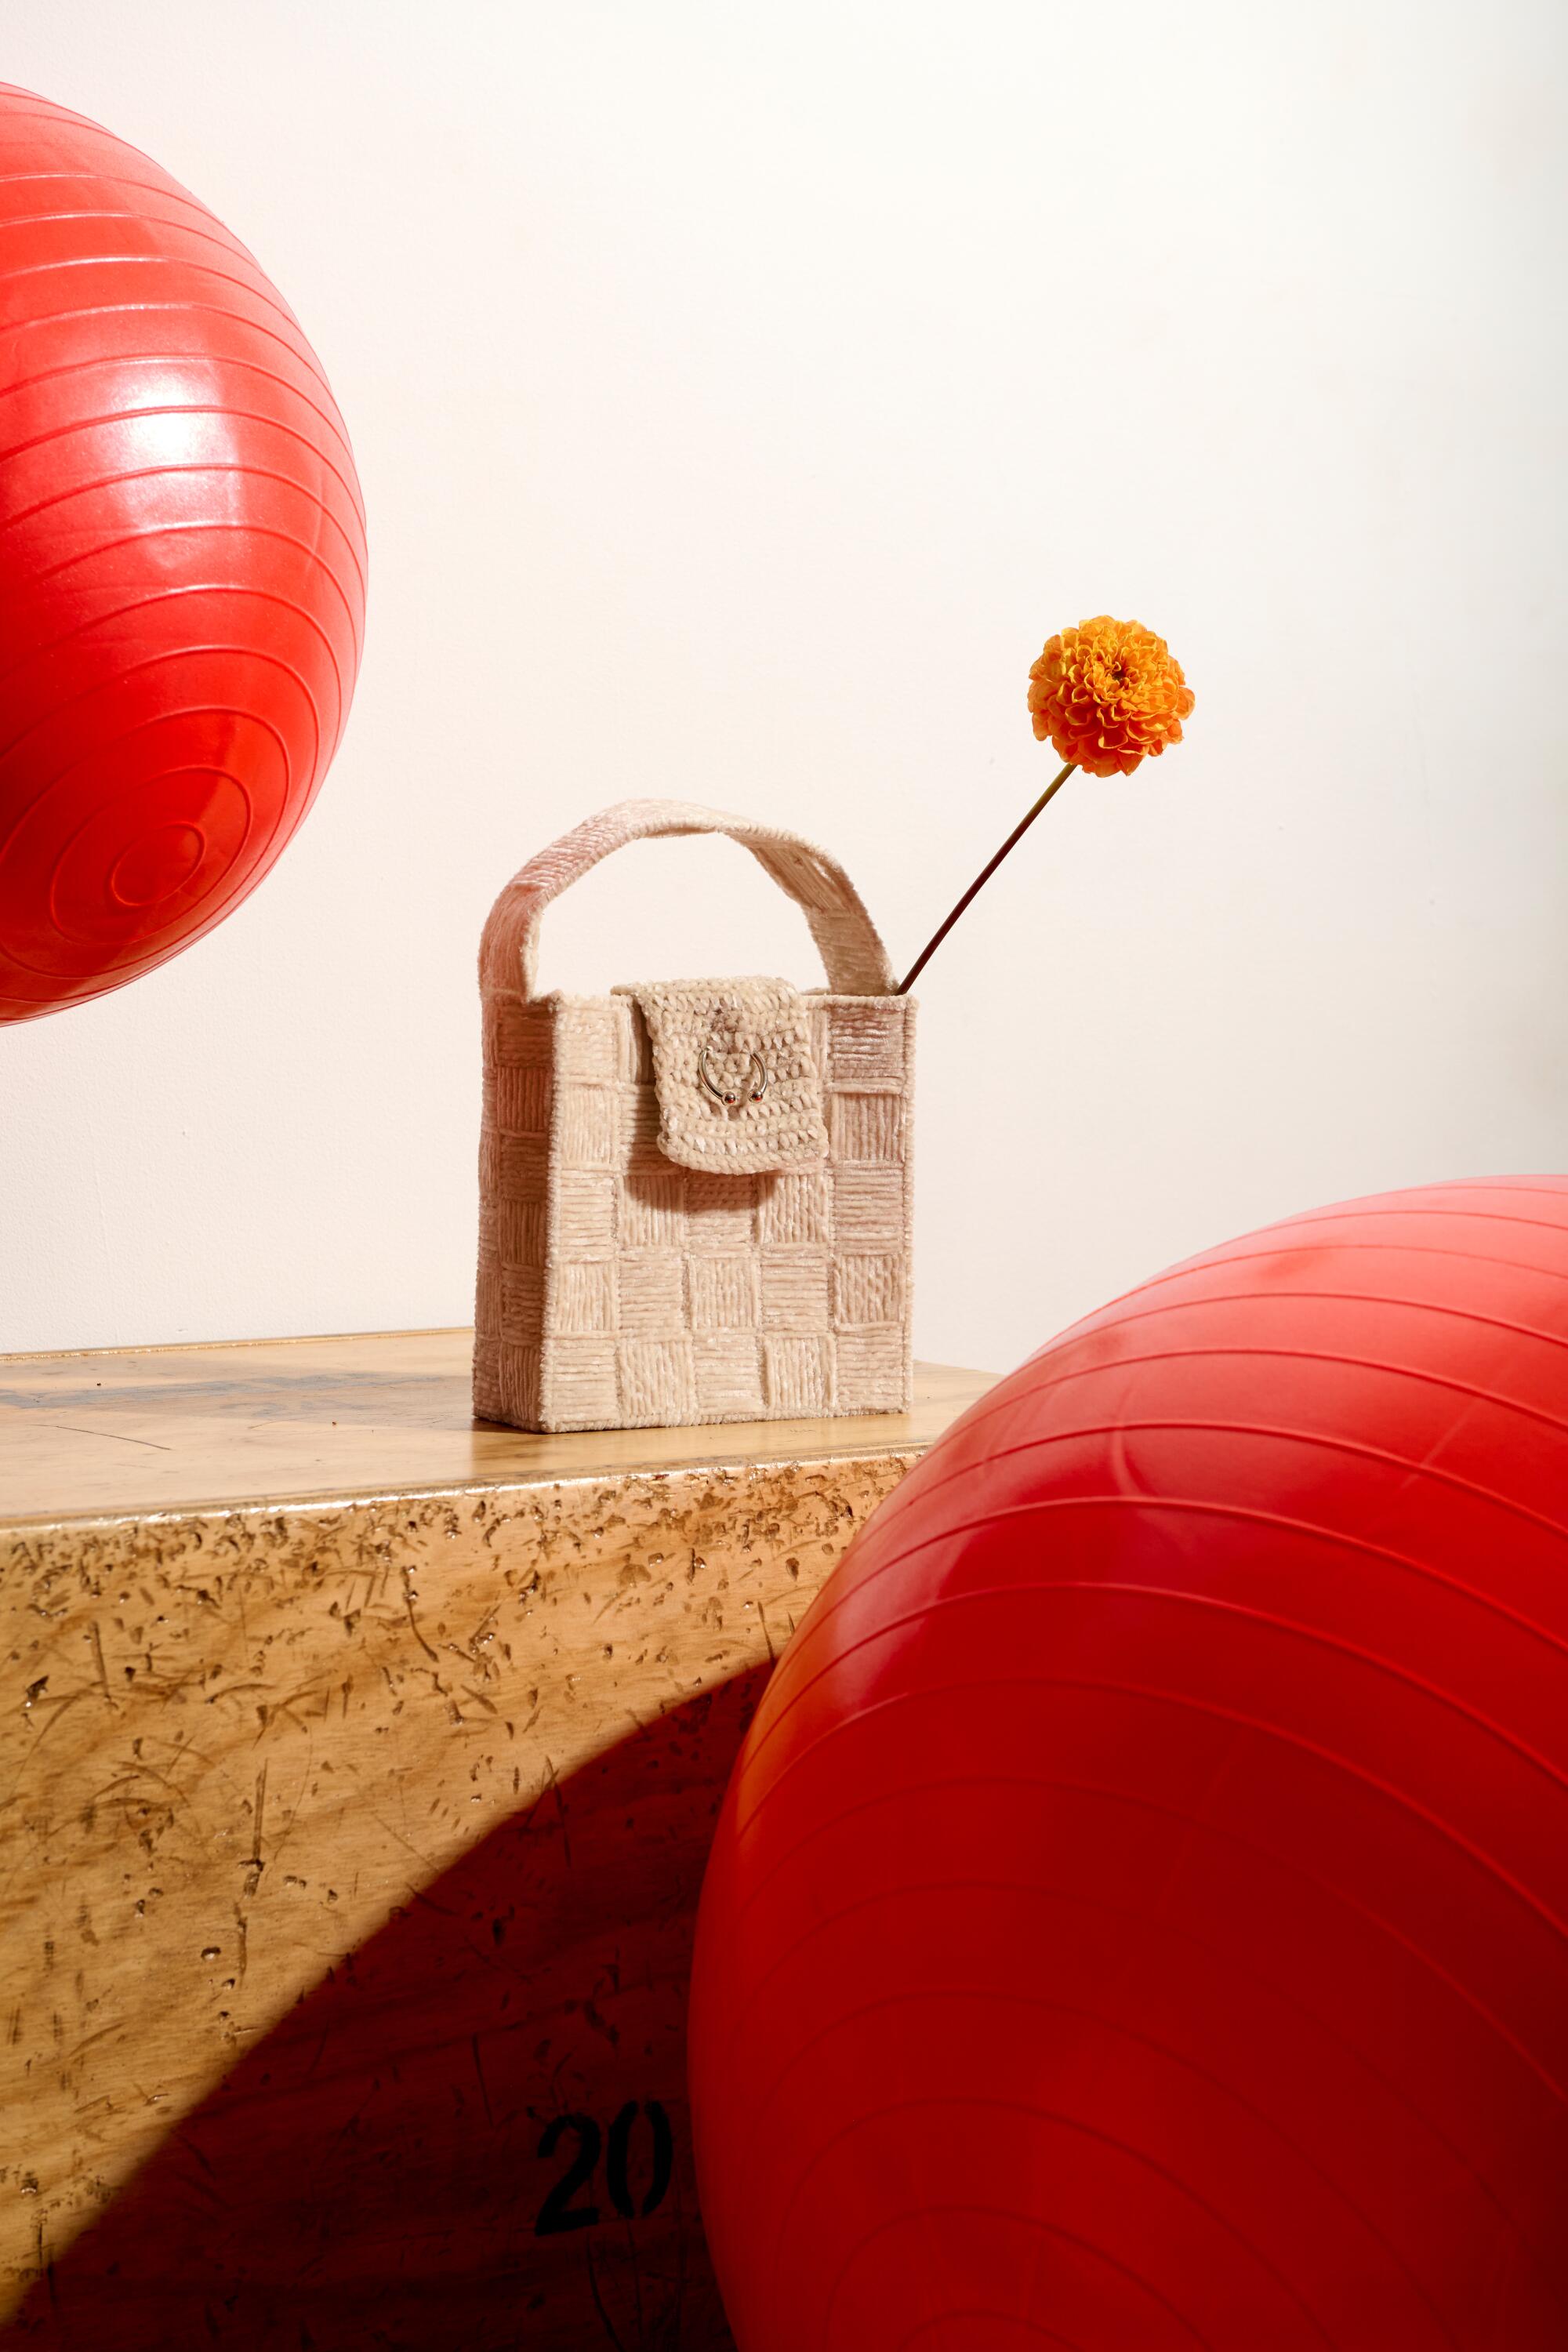 A boxy handbag with a tall-stemmed flower in it sitting on a table near two big red balls.